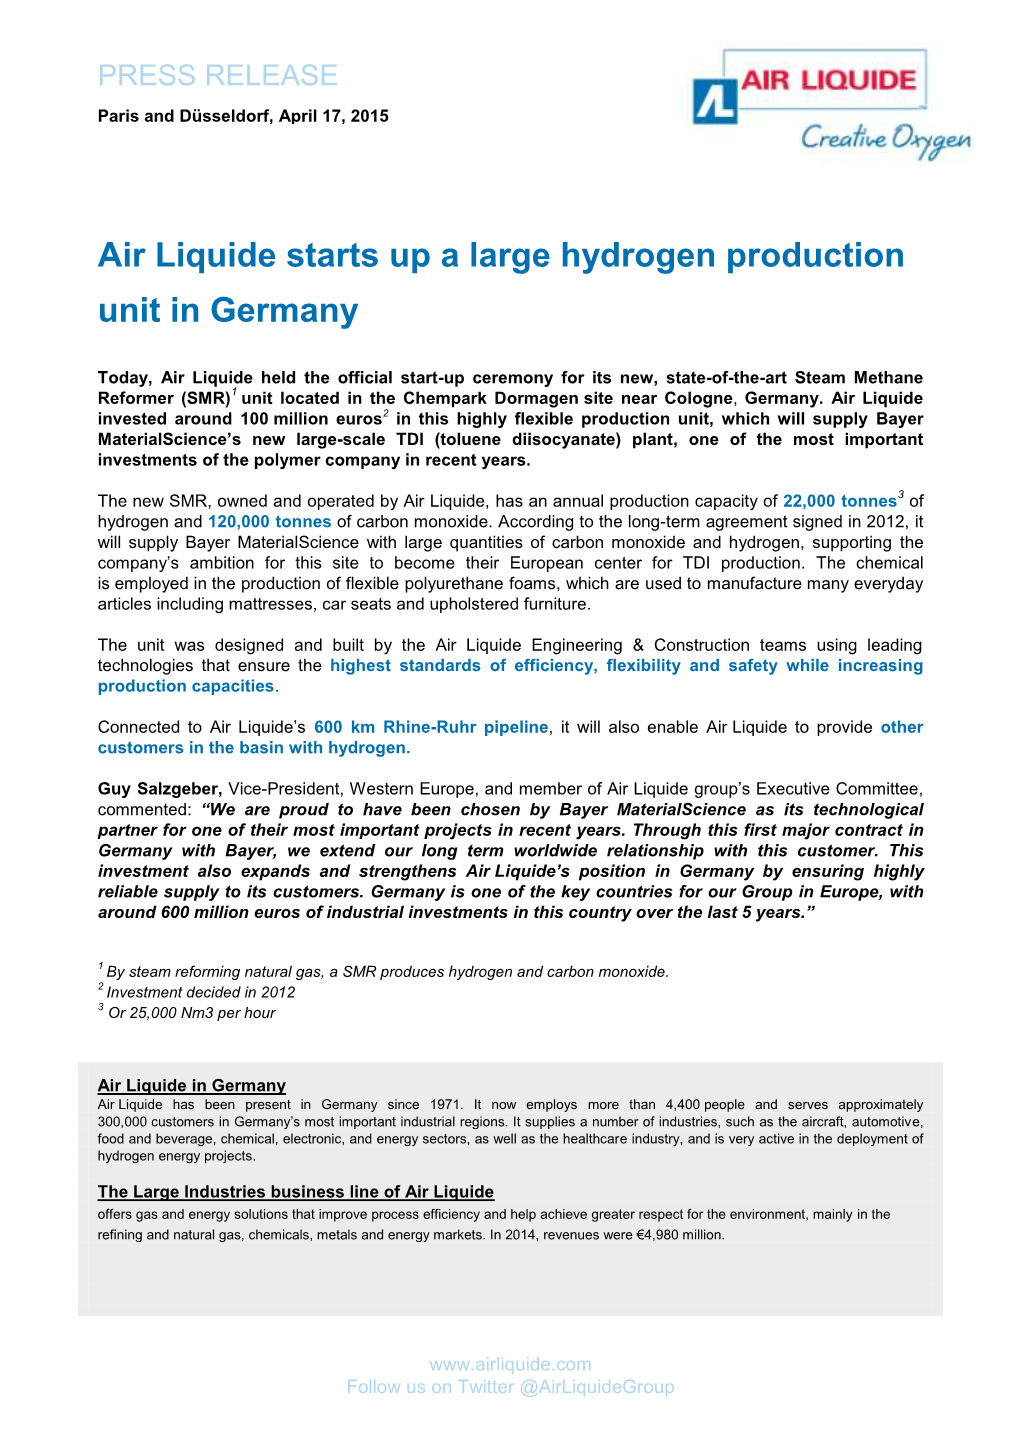 Air Liquide Starts up a Large Hydrogen Production Unit in Germany